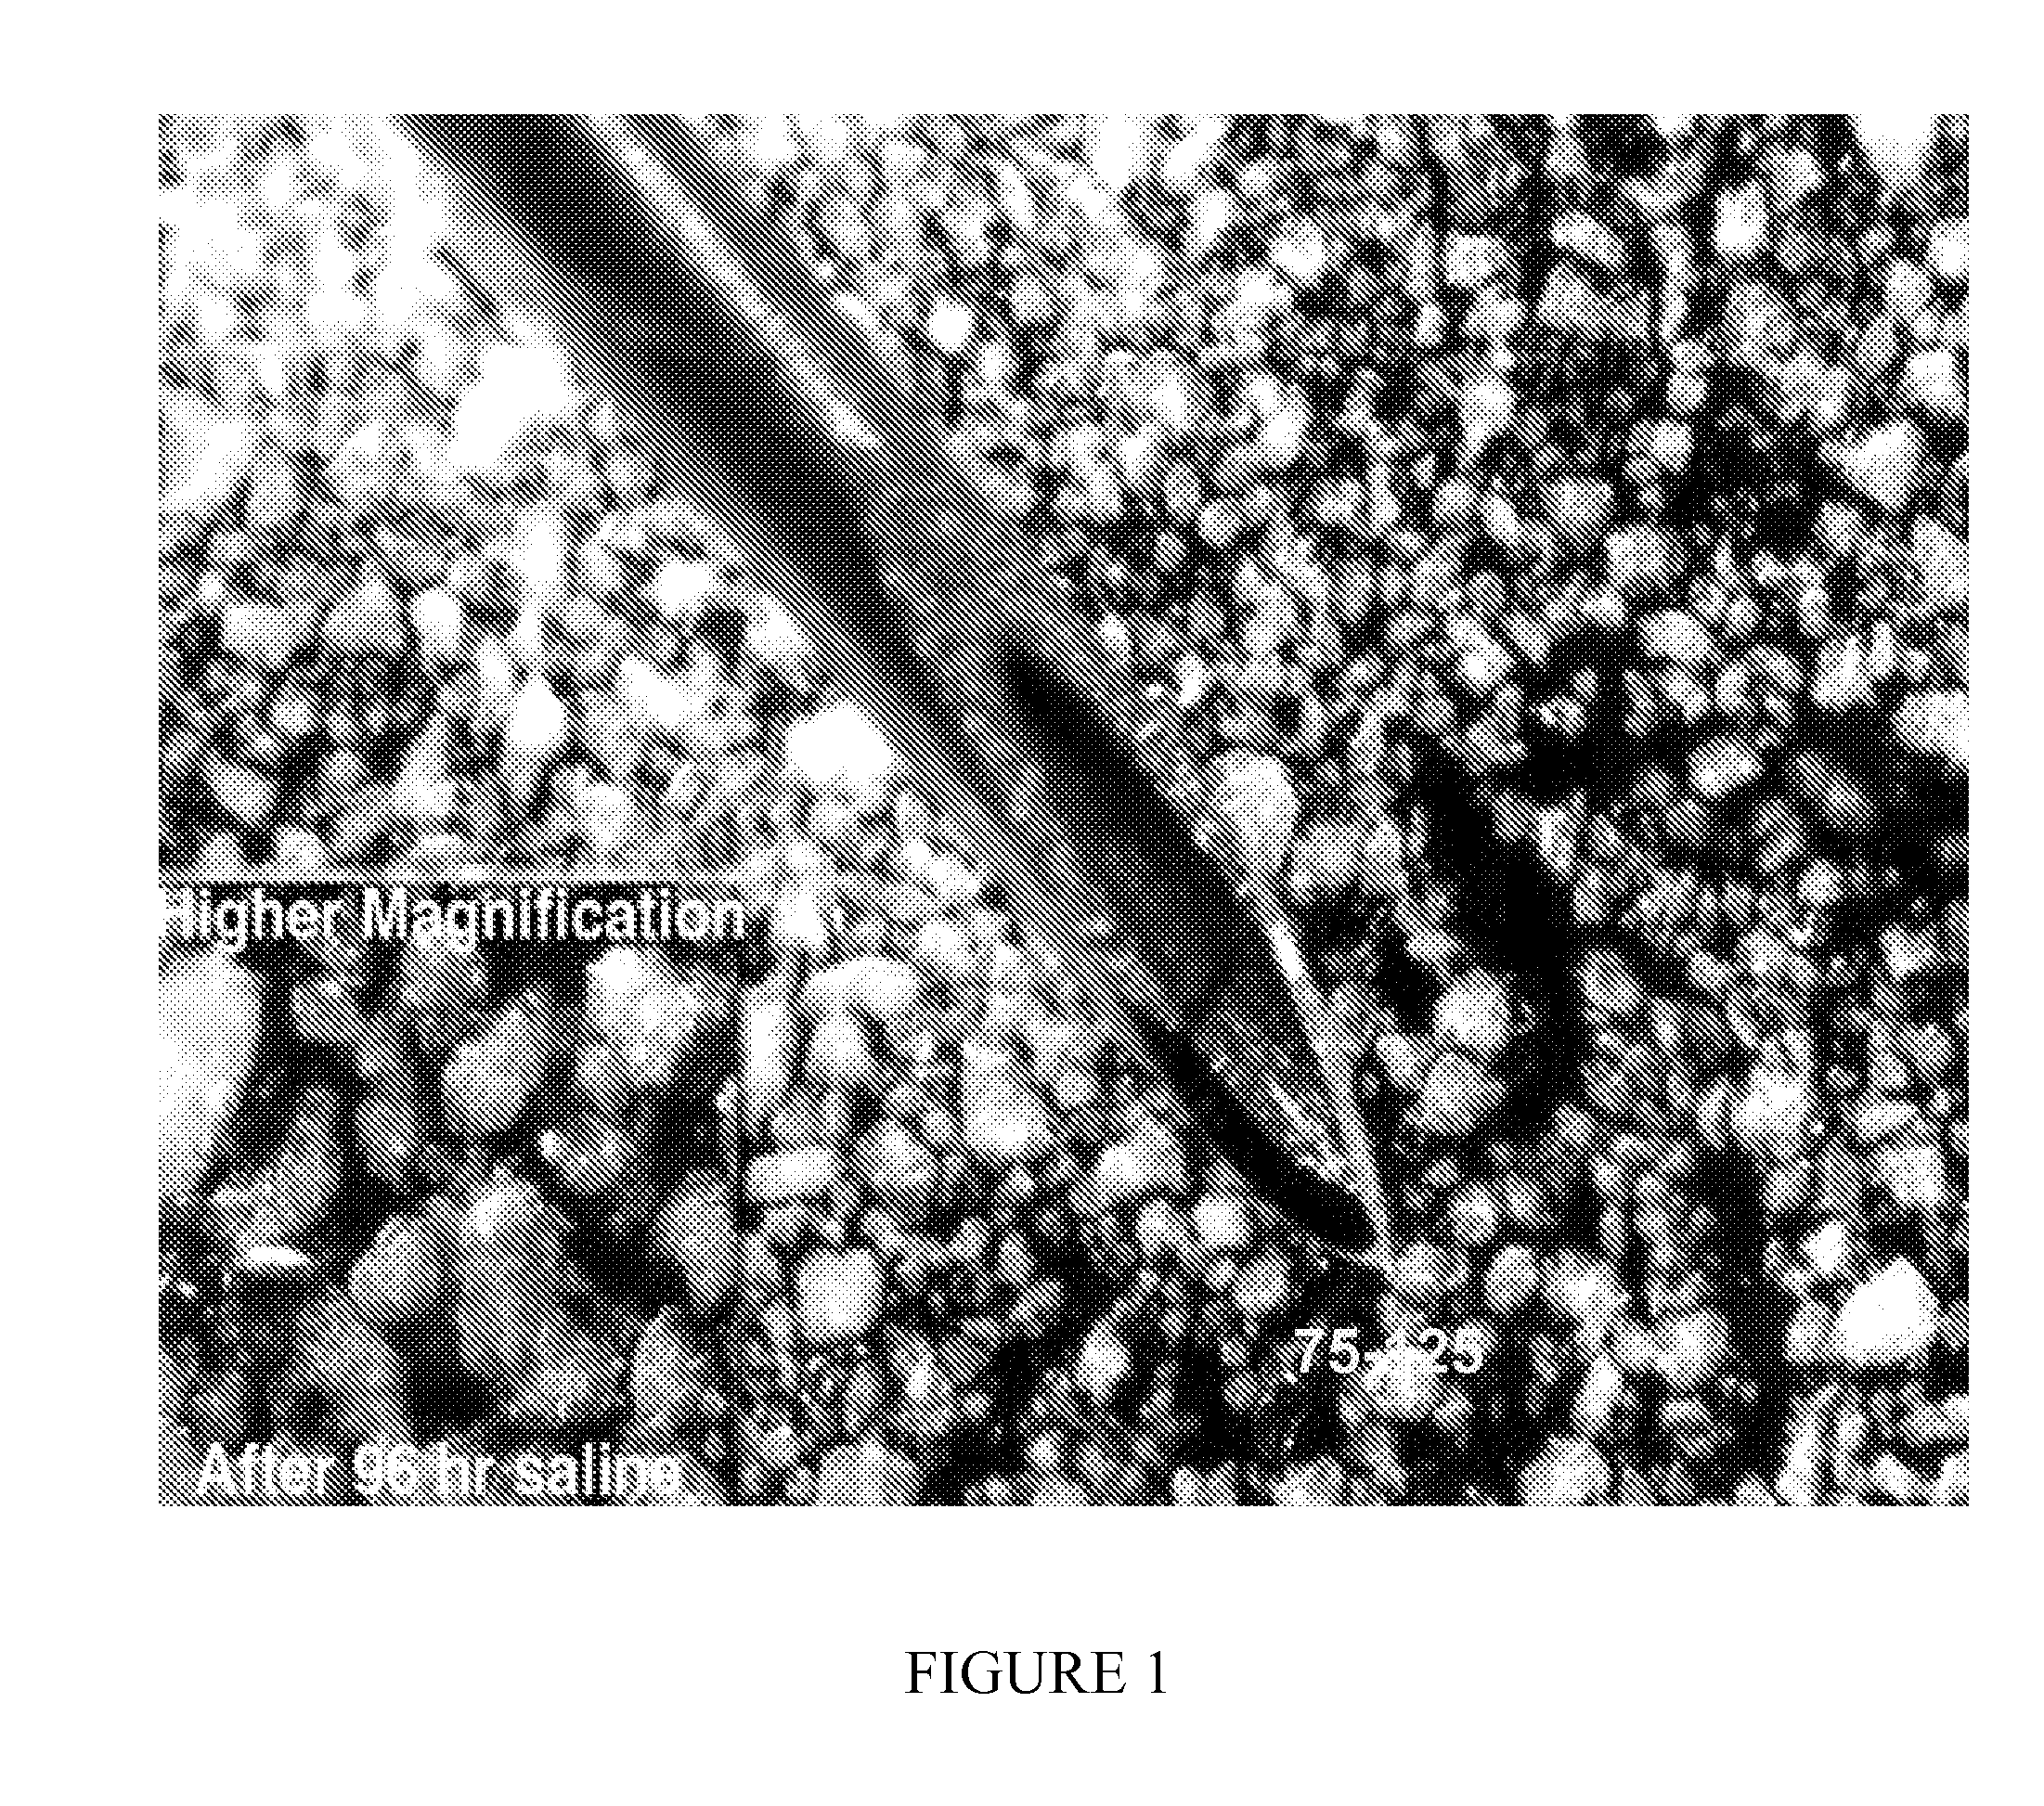 Biocompatible protein-based particles and methods thereof